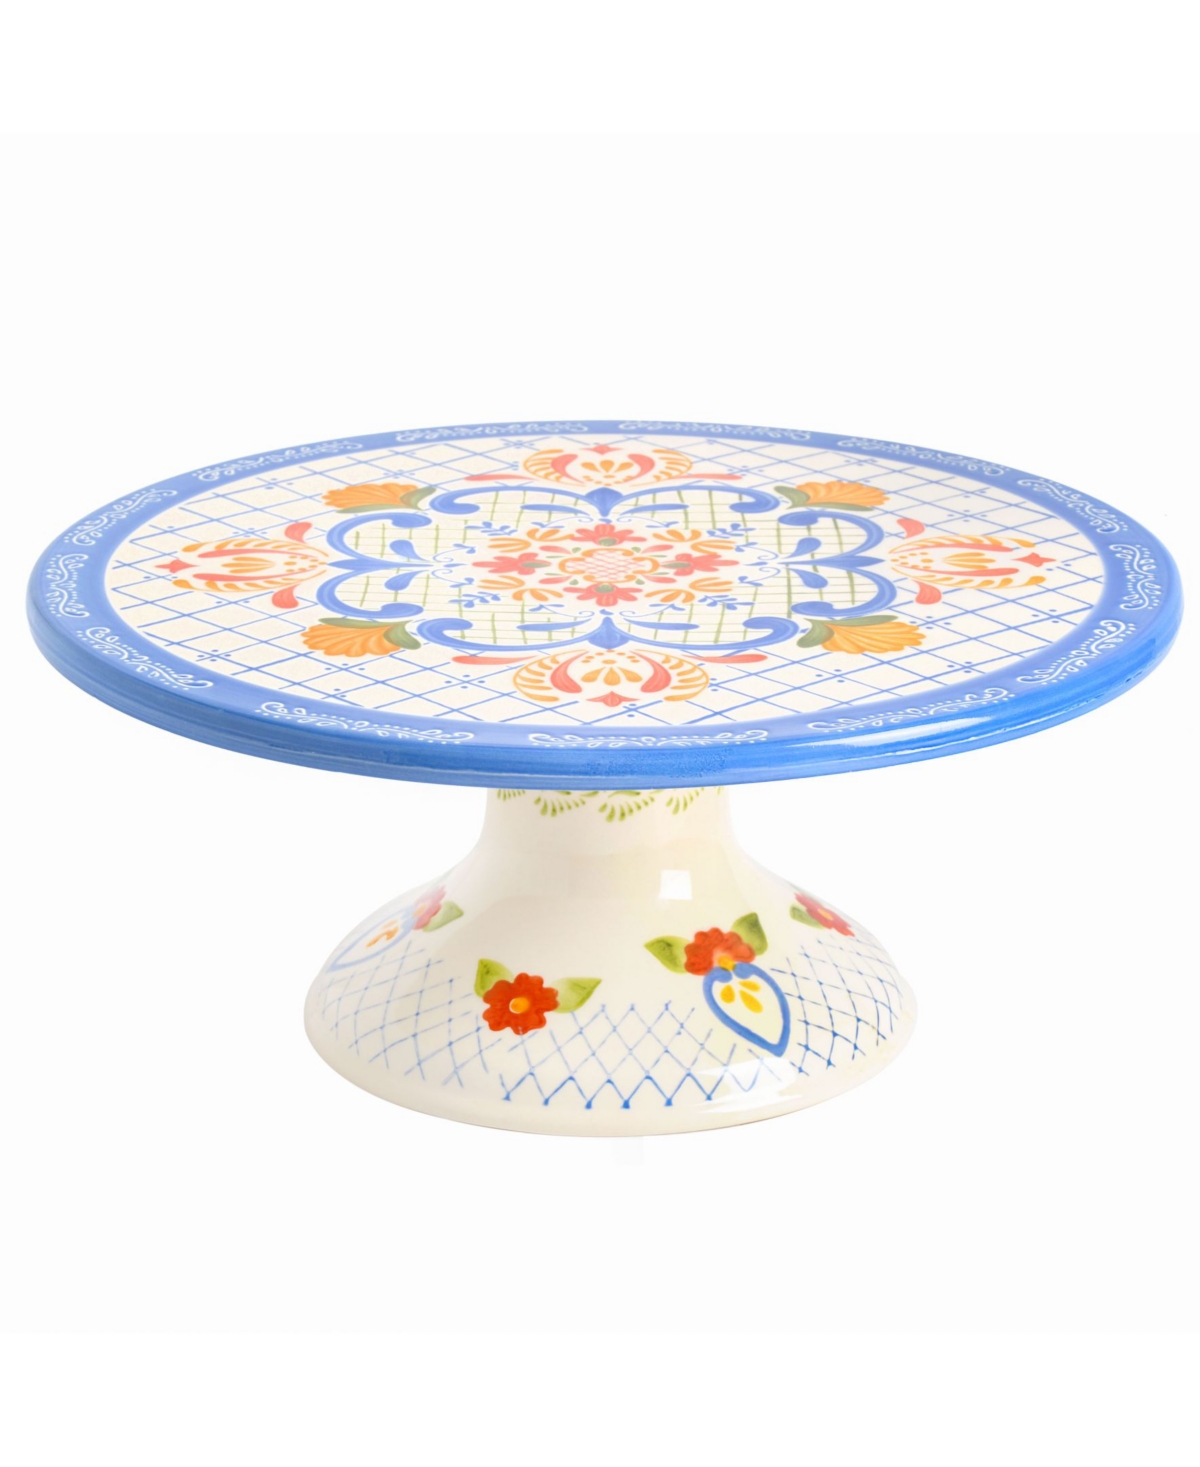 LAURIE GATES TIERRA 12" HAND-PAINTED CAKE STAND